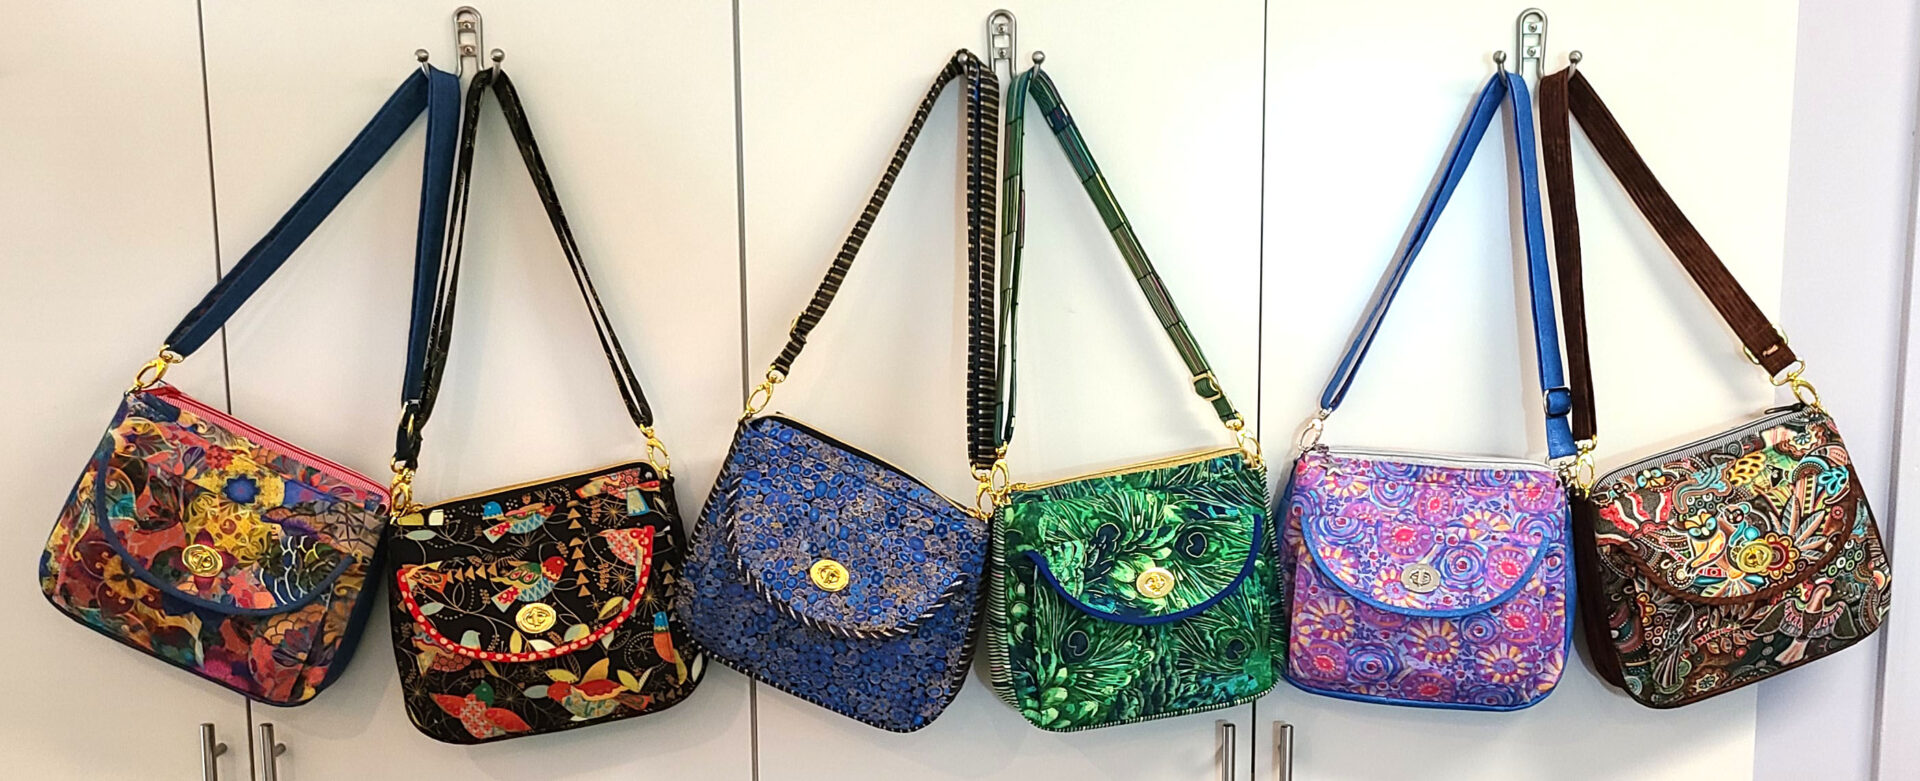 A group of colorful handbags hanging on a wall.